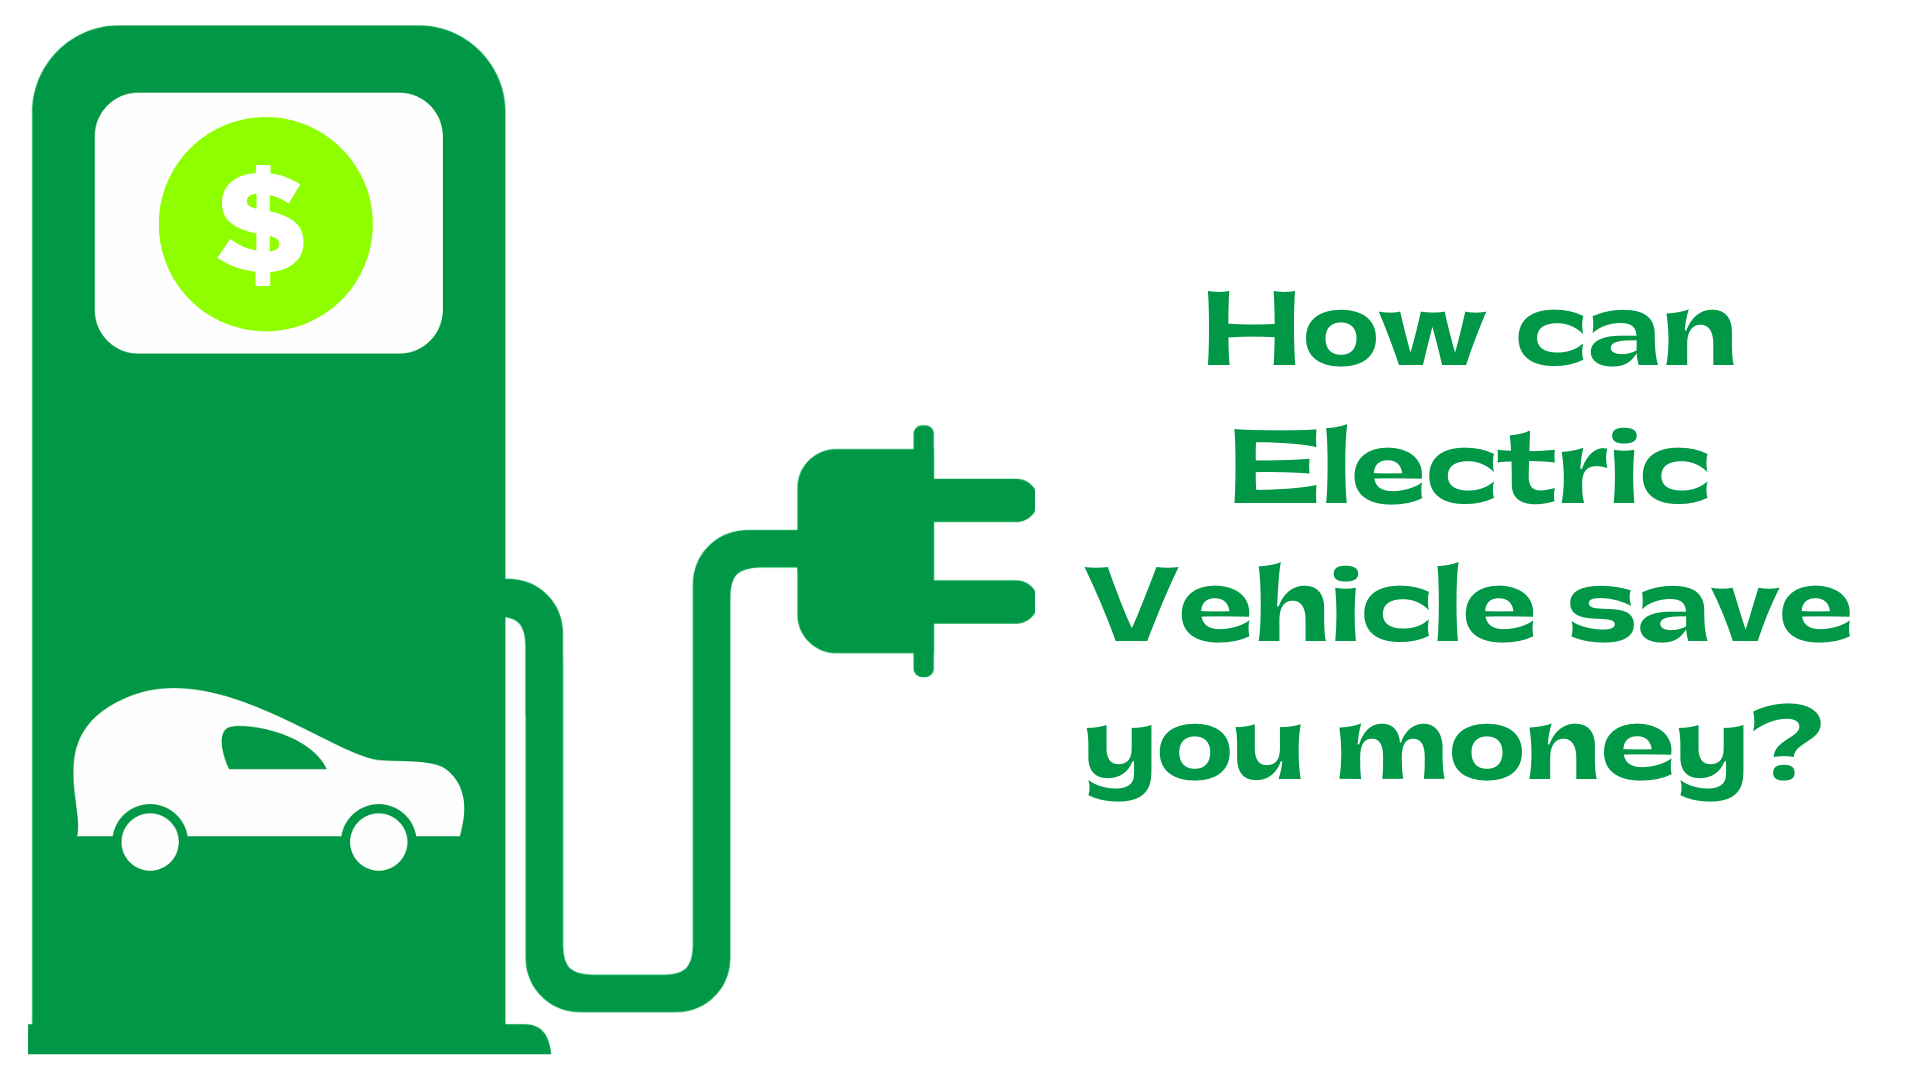 How does Electric Vehicle save you money, than the Pricey Fuel Guzzlers?